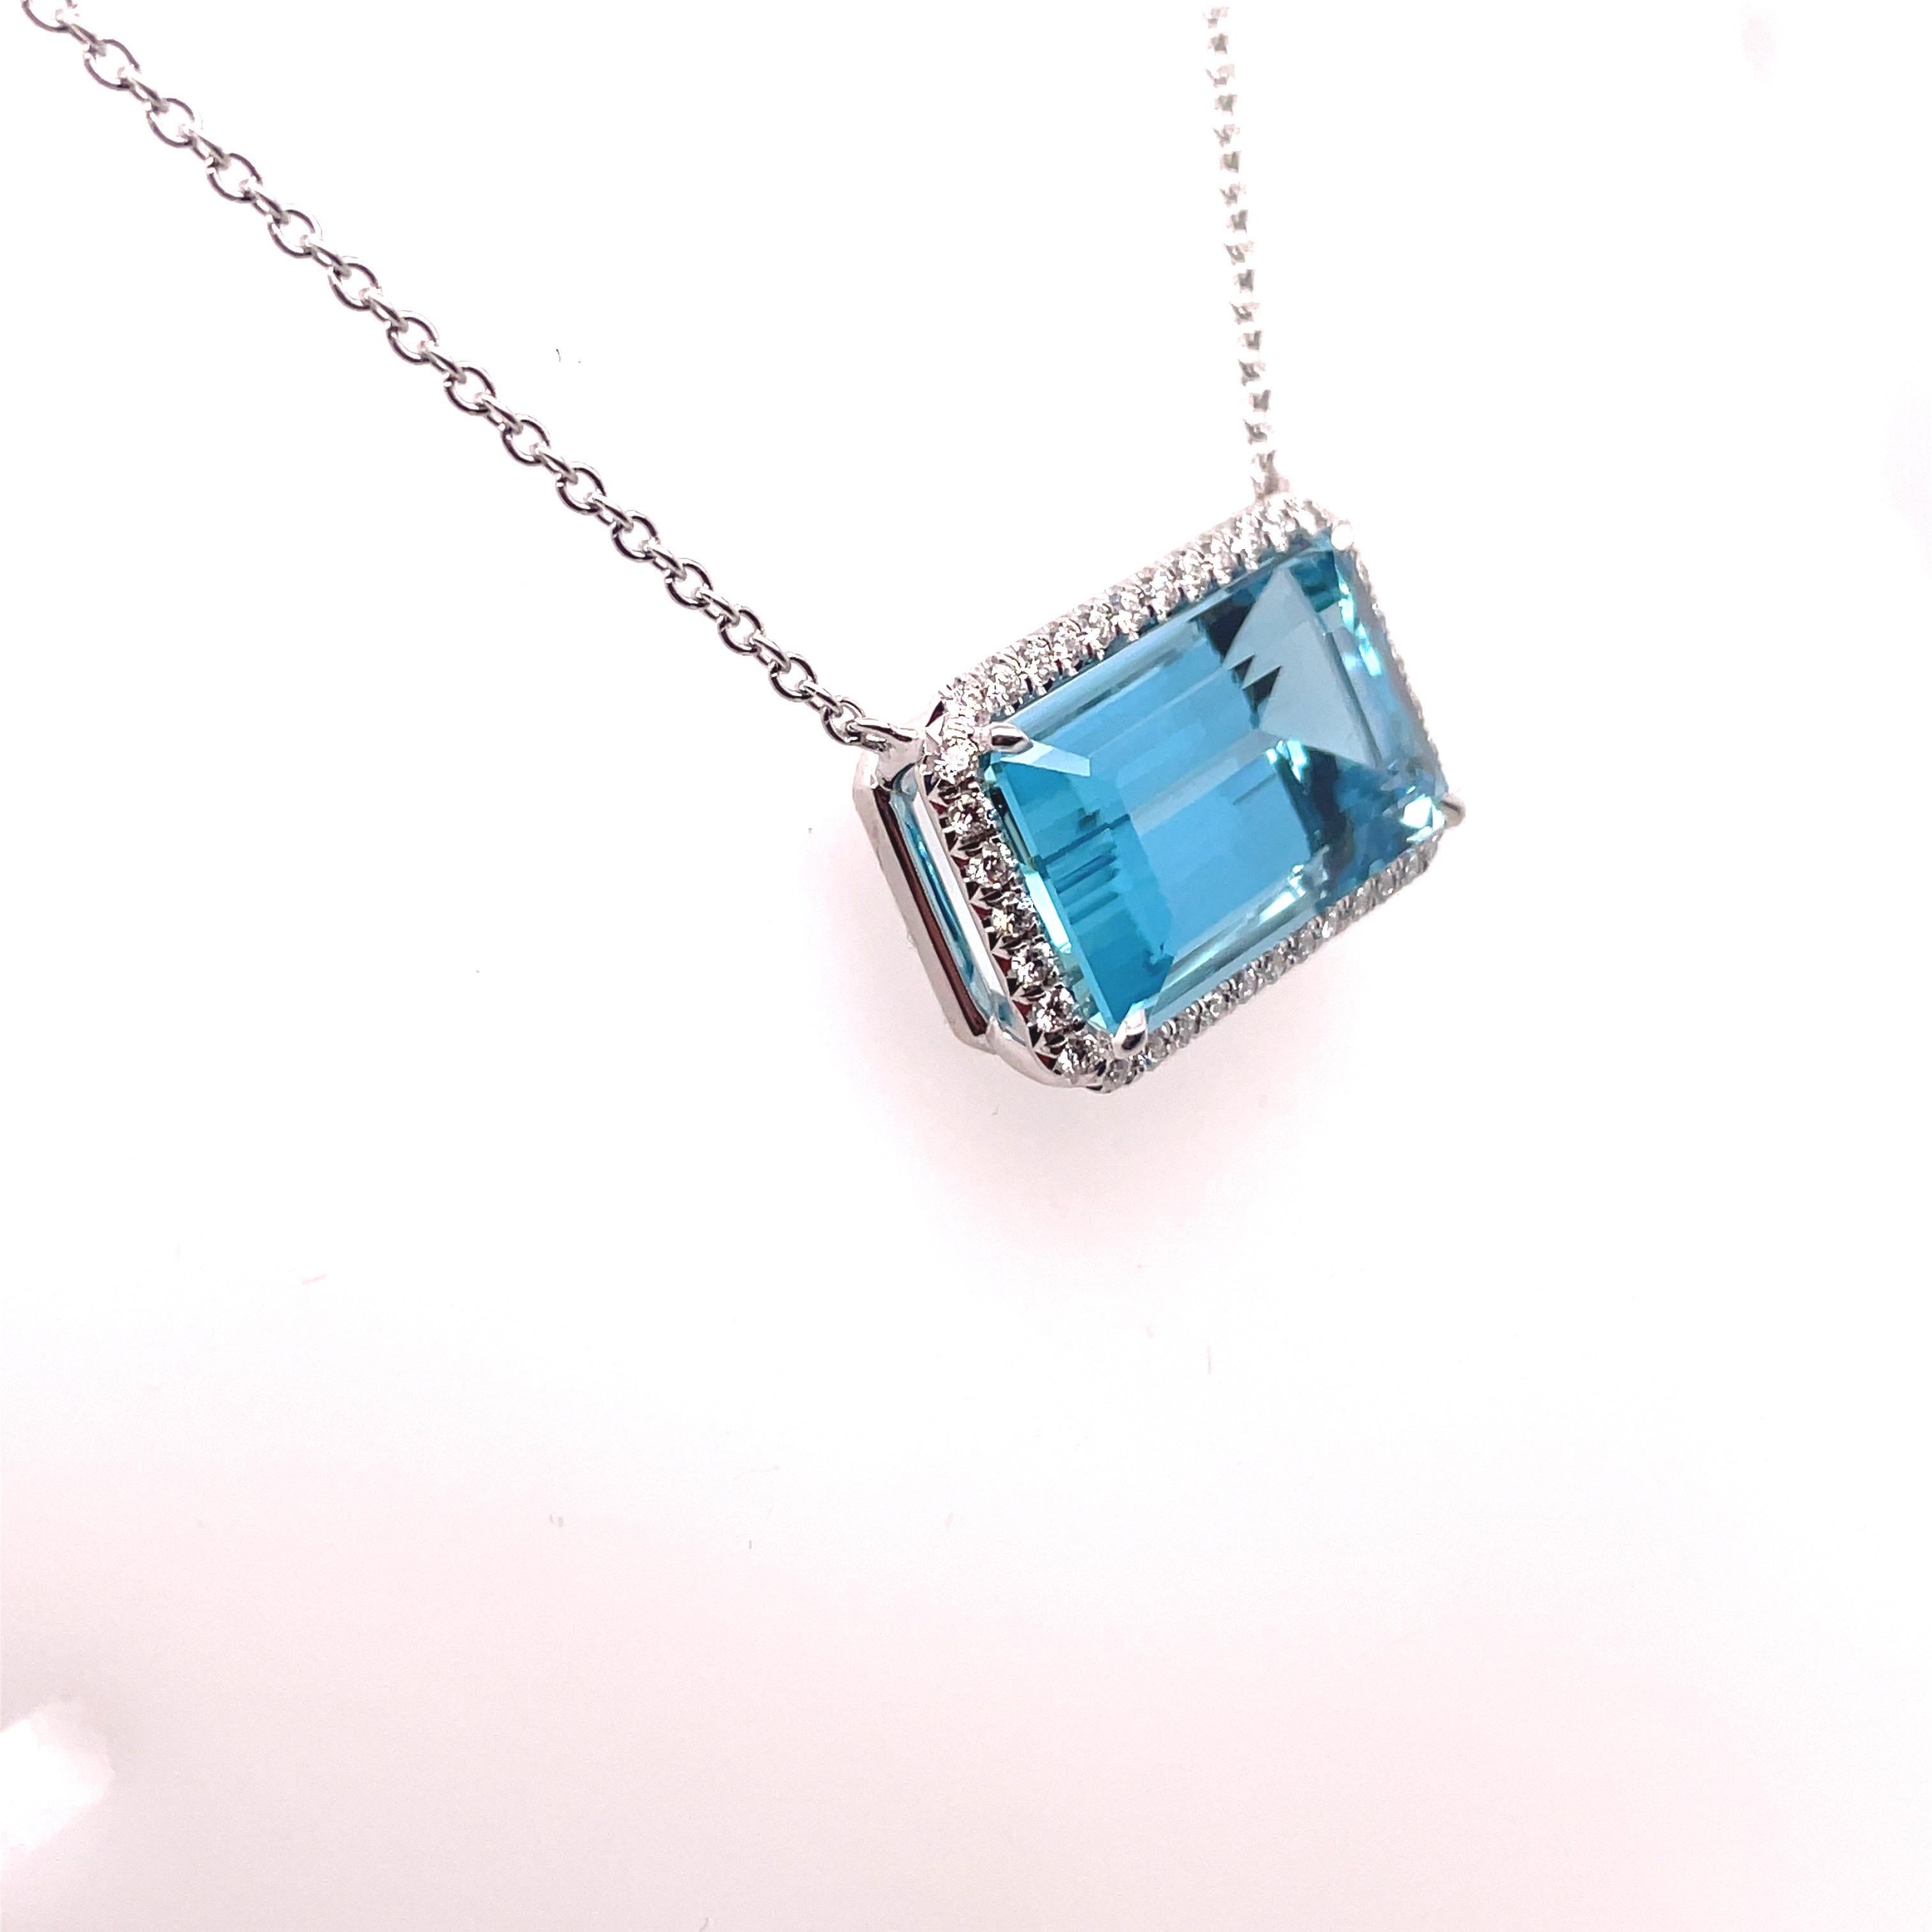 Absolutely studding 18kt white gold necklace featuring a stunning perfectly colored 14.30ct aquamarine surrounded by 38 round brilliant cut diamonds for a total of .37cts. This necklace can be secured at two separate lengths to make sure it hits at